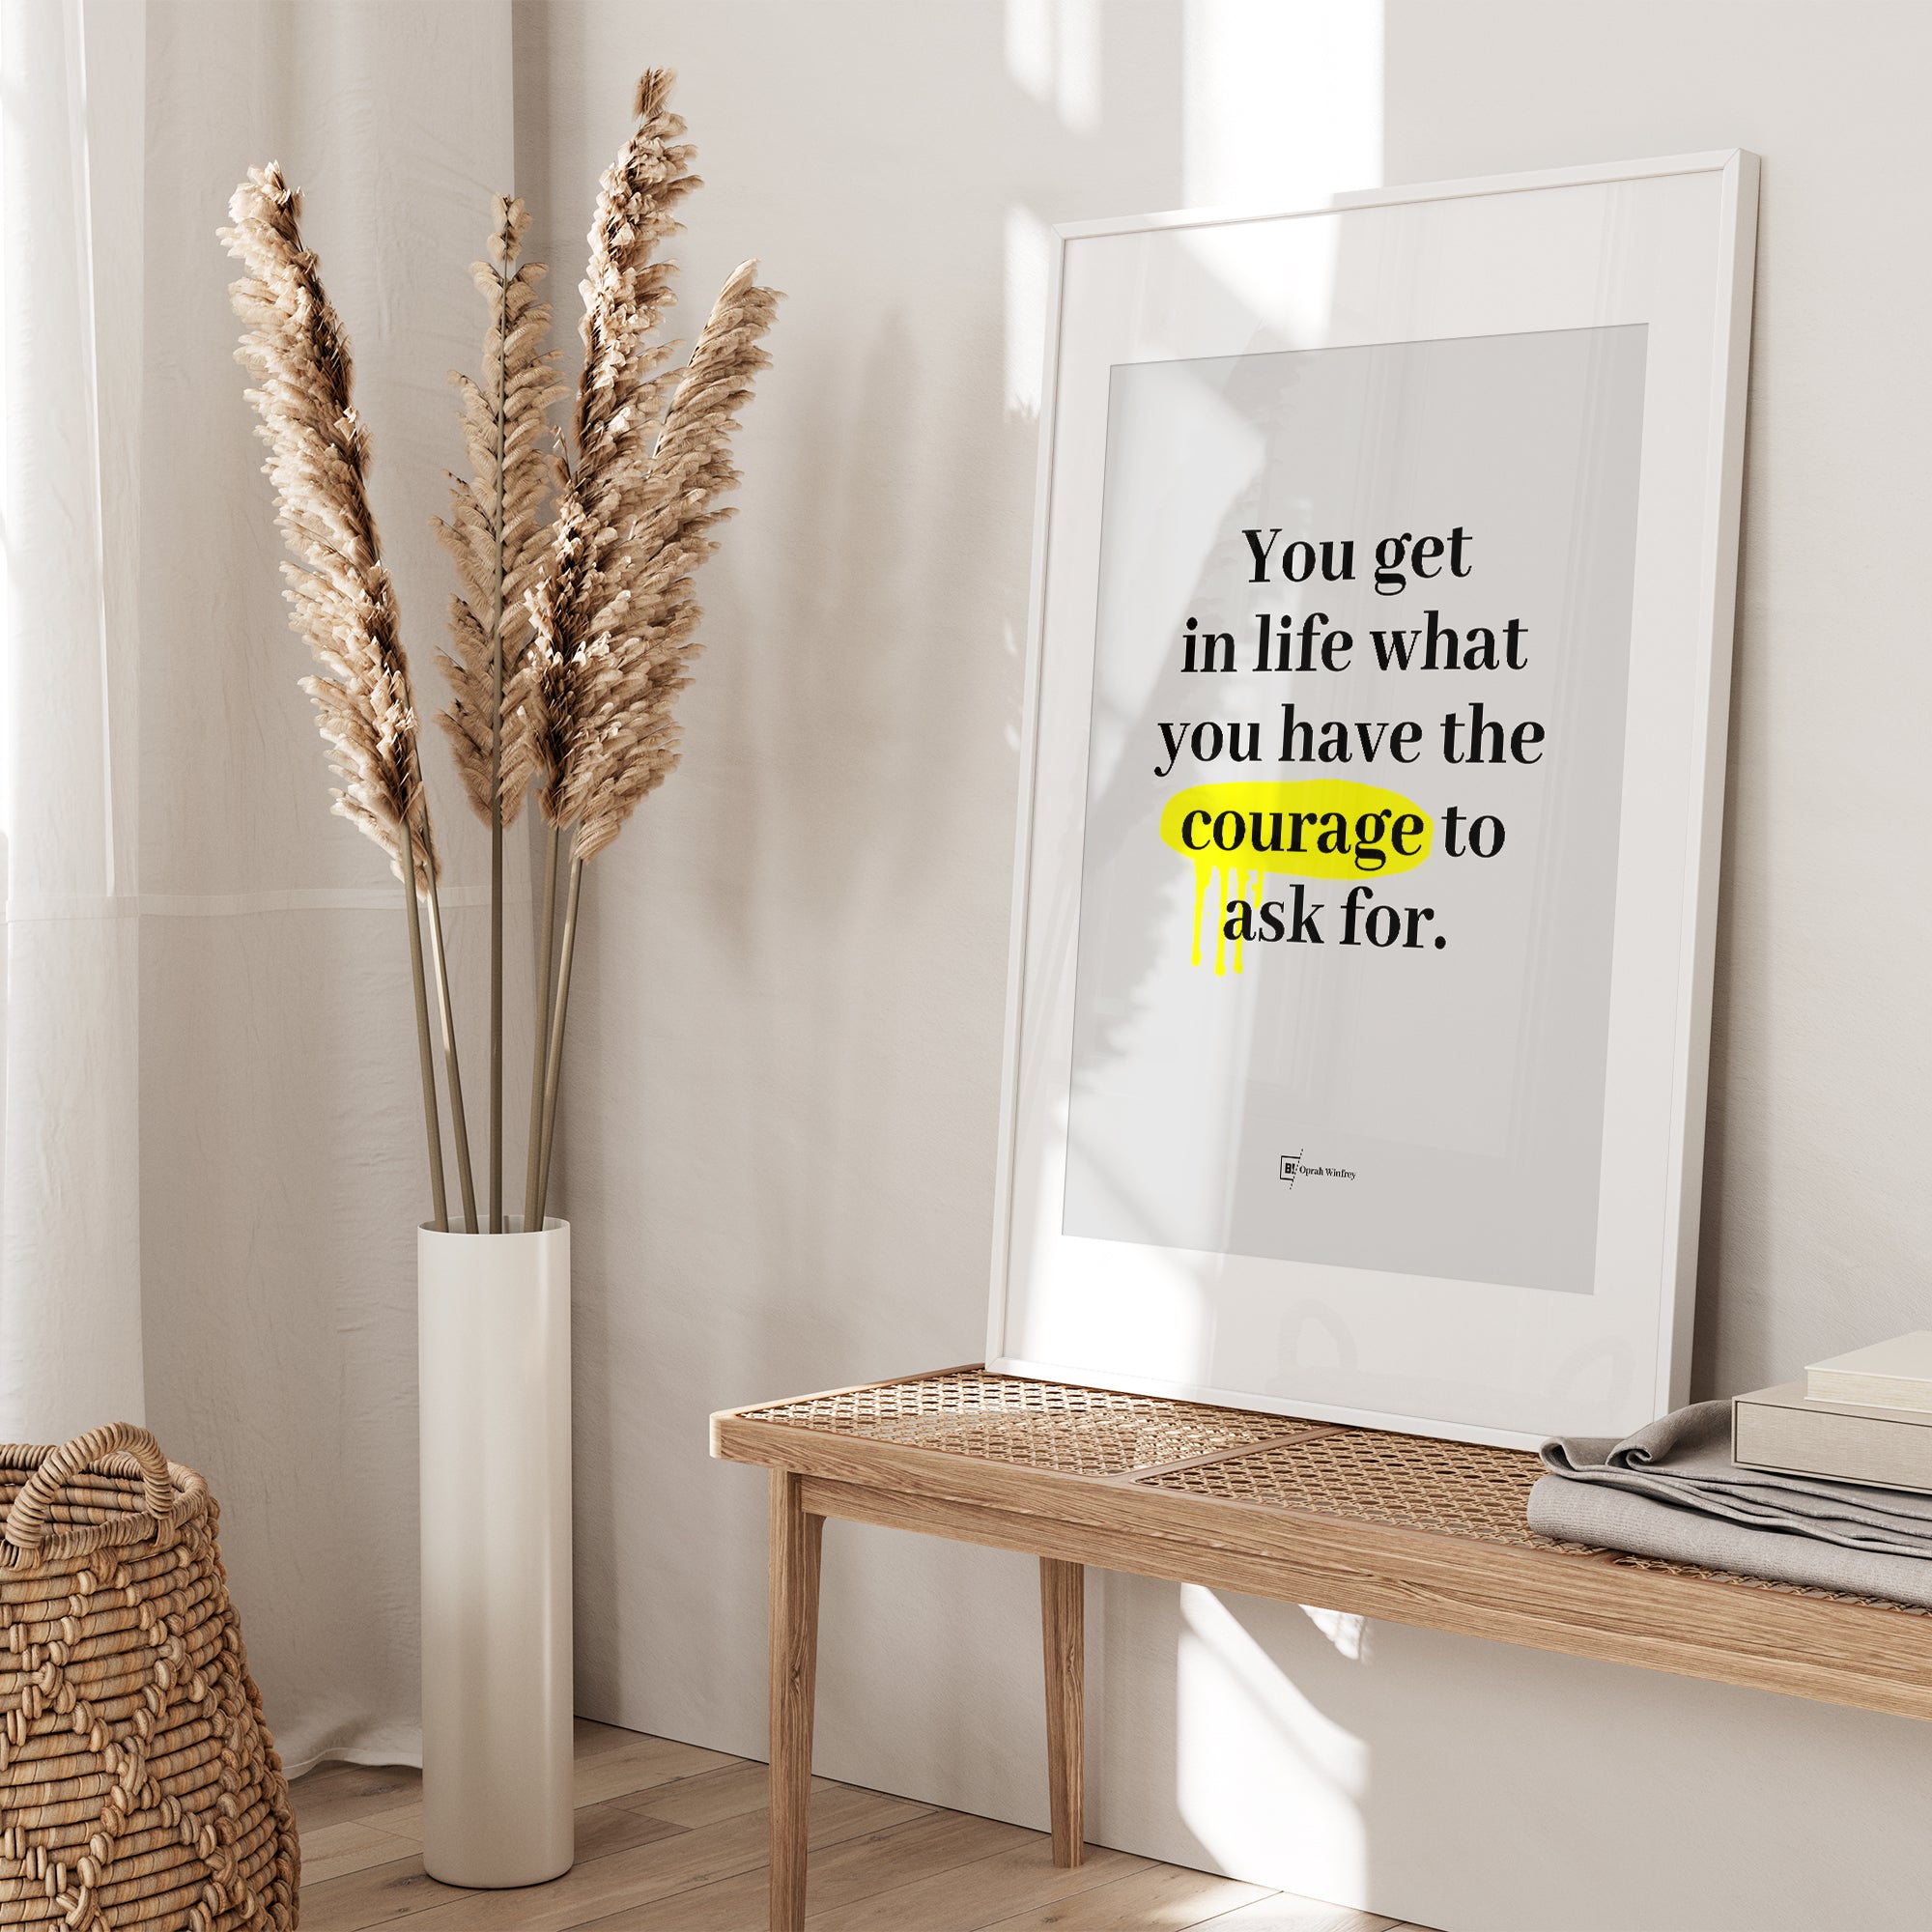 Be inspired by Oprah Winfrey's famous "You get in life what you have the courage to ask for" quote art print. This artwork was printed using the giclée process on archival acid-free paper and is presented in a white frame with passe-partout that captures its timeless beauty in every detail.